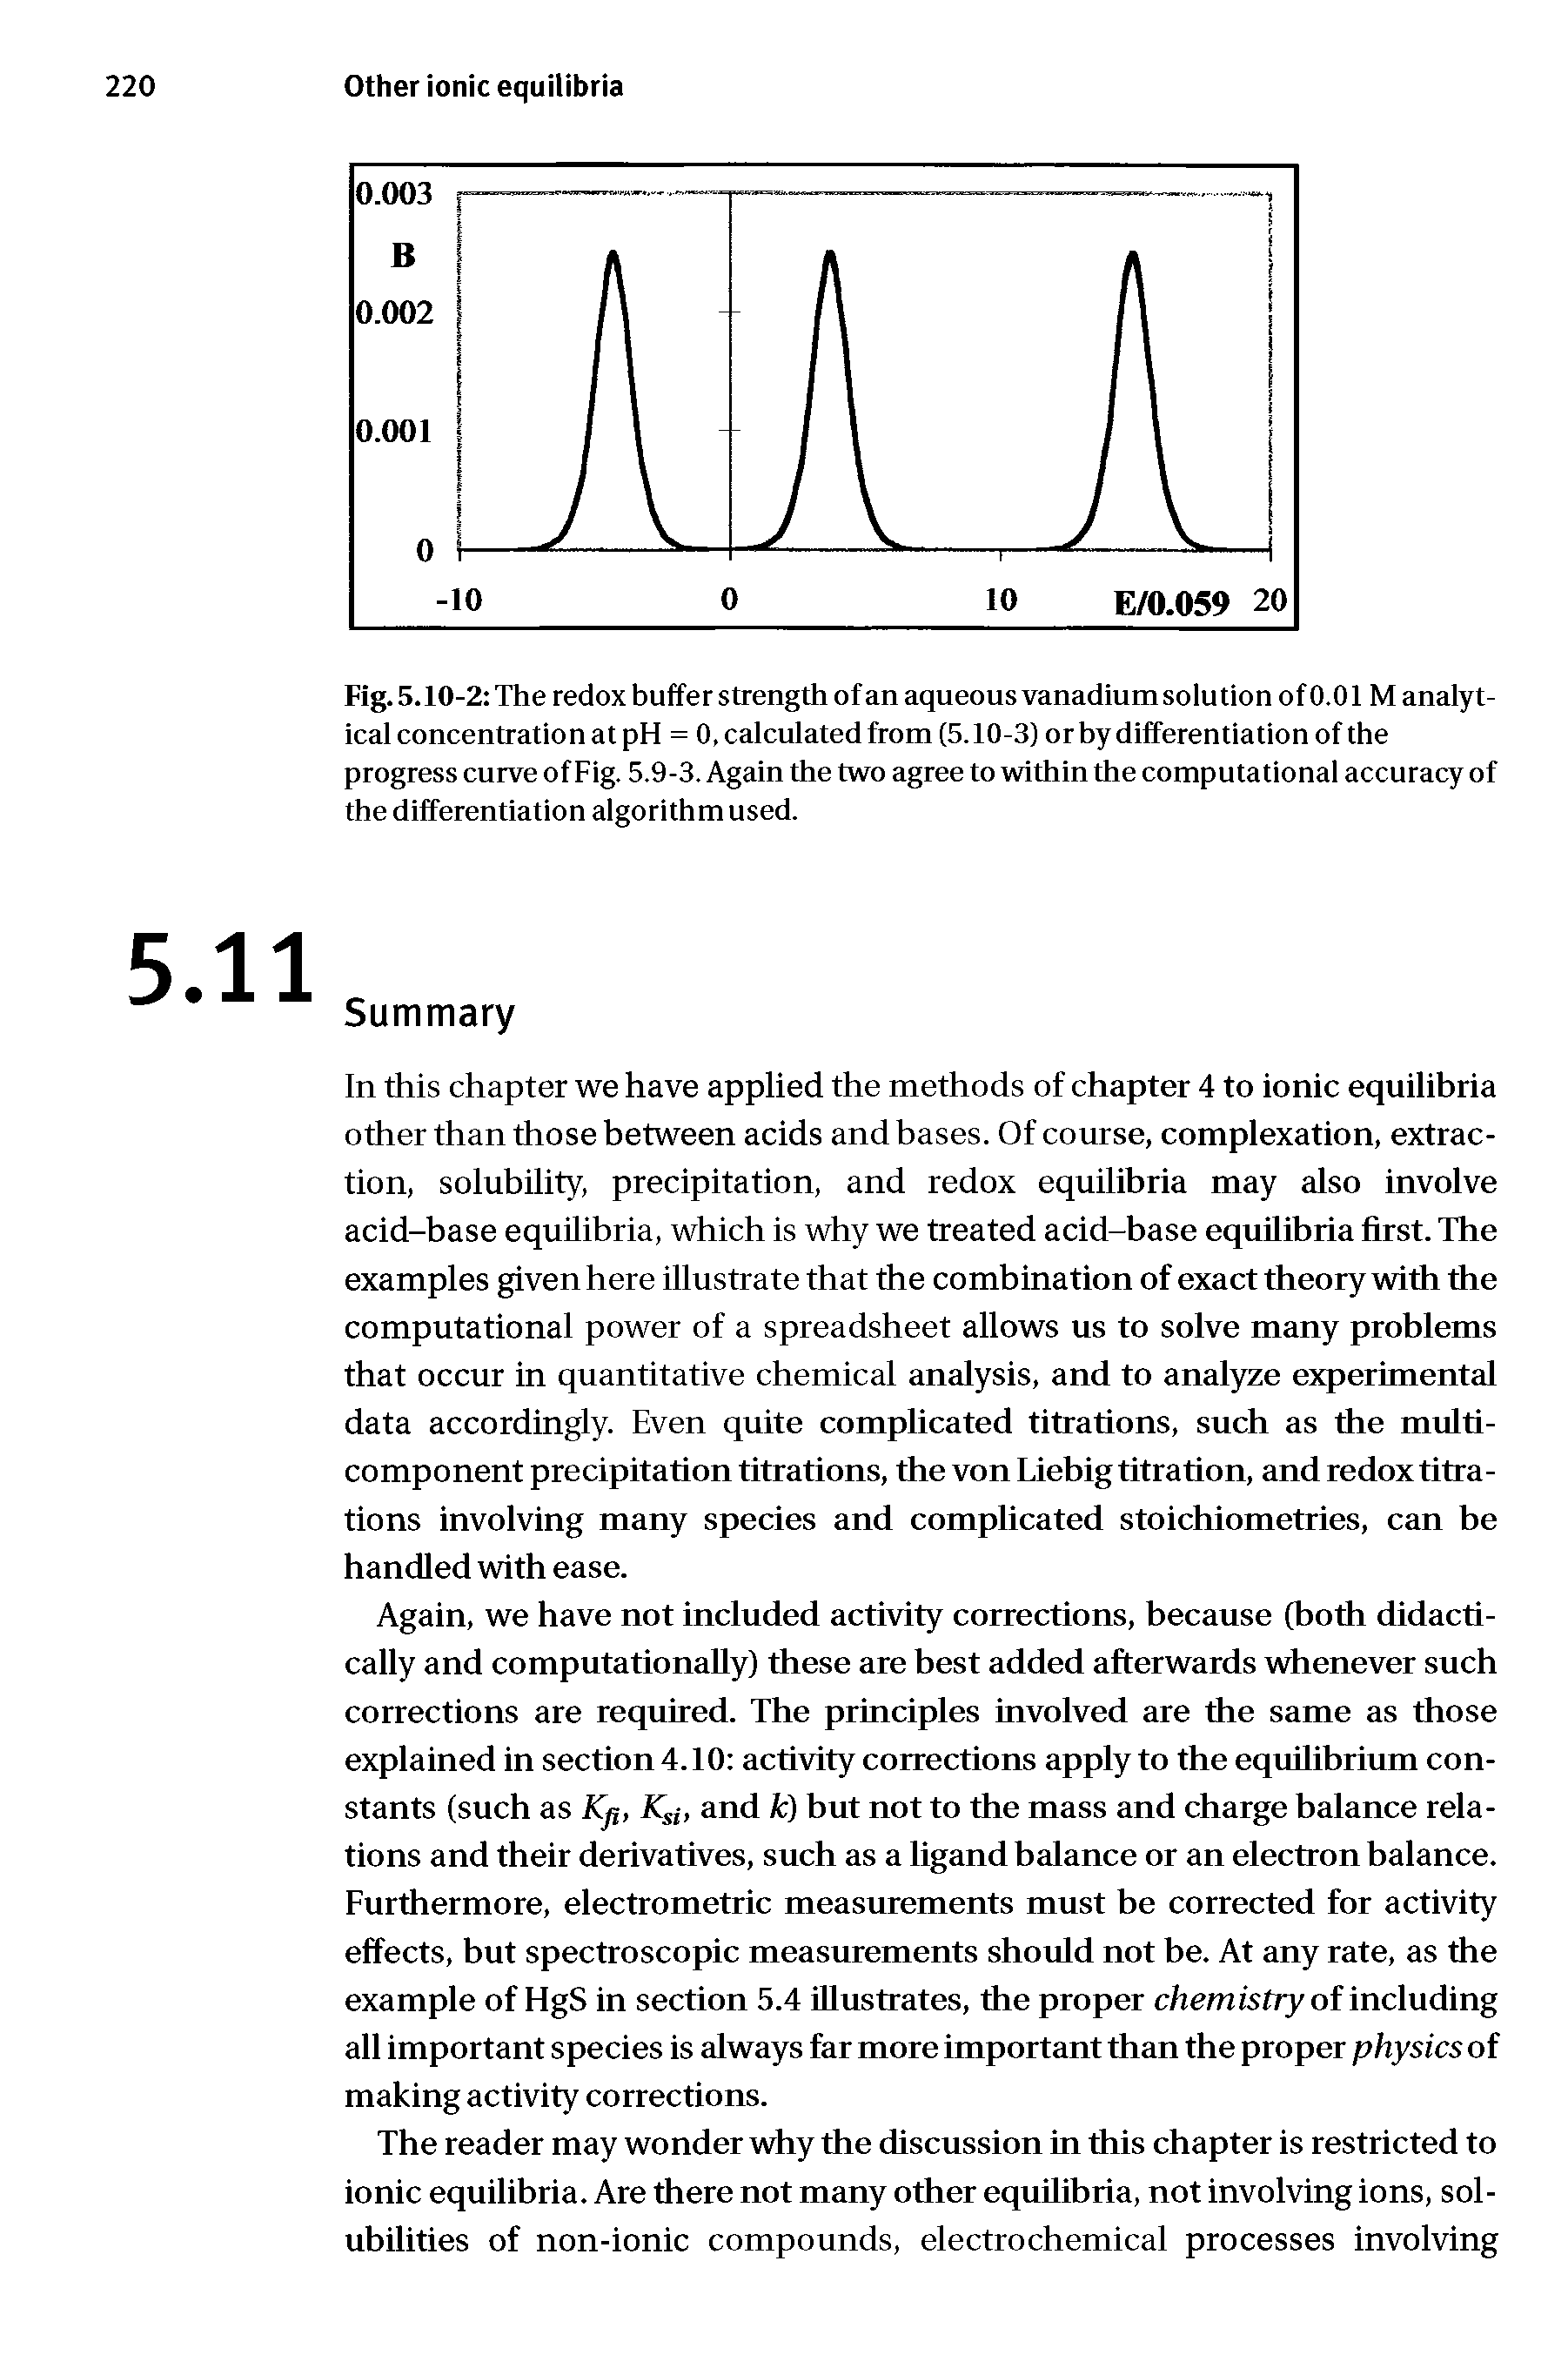 Fig. 5.10-2 The redox buffer strength of an aqueous vanadium solution of 0.01 M analytical concentration at pH = 0, calculated from (5.10-3) or by differentiation of the progress curve of Fig. 5.9-3. Again the two agree to within the computational accuracy of the differentiation algorithm used.